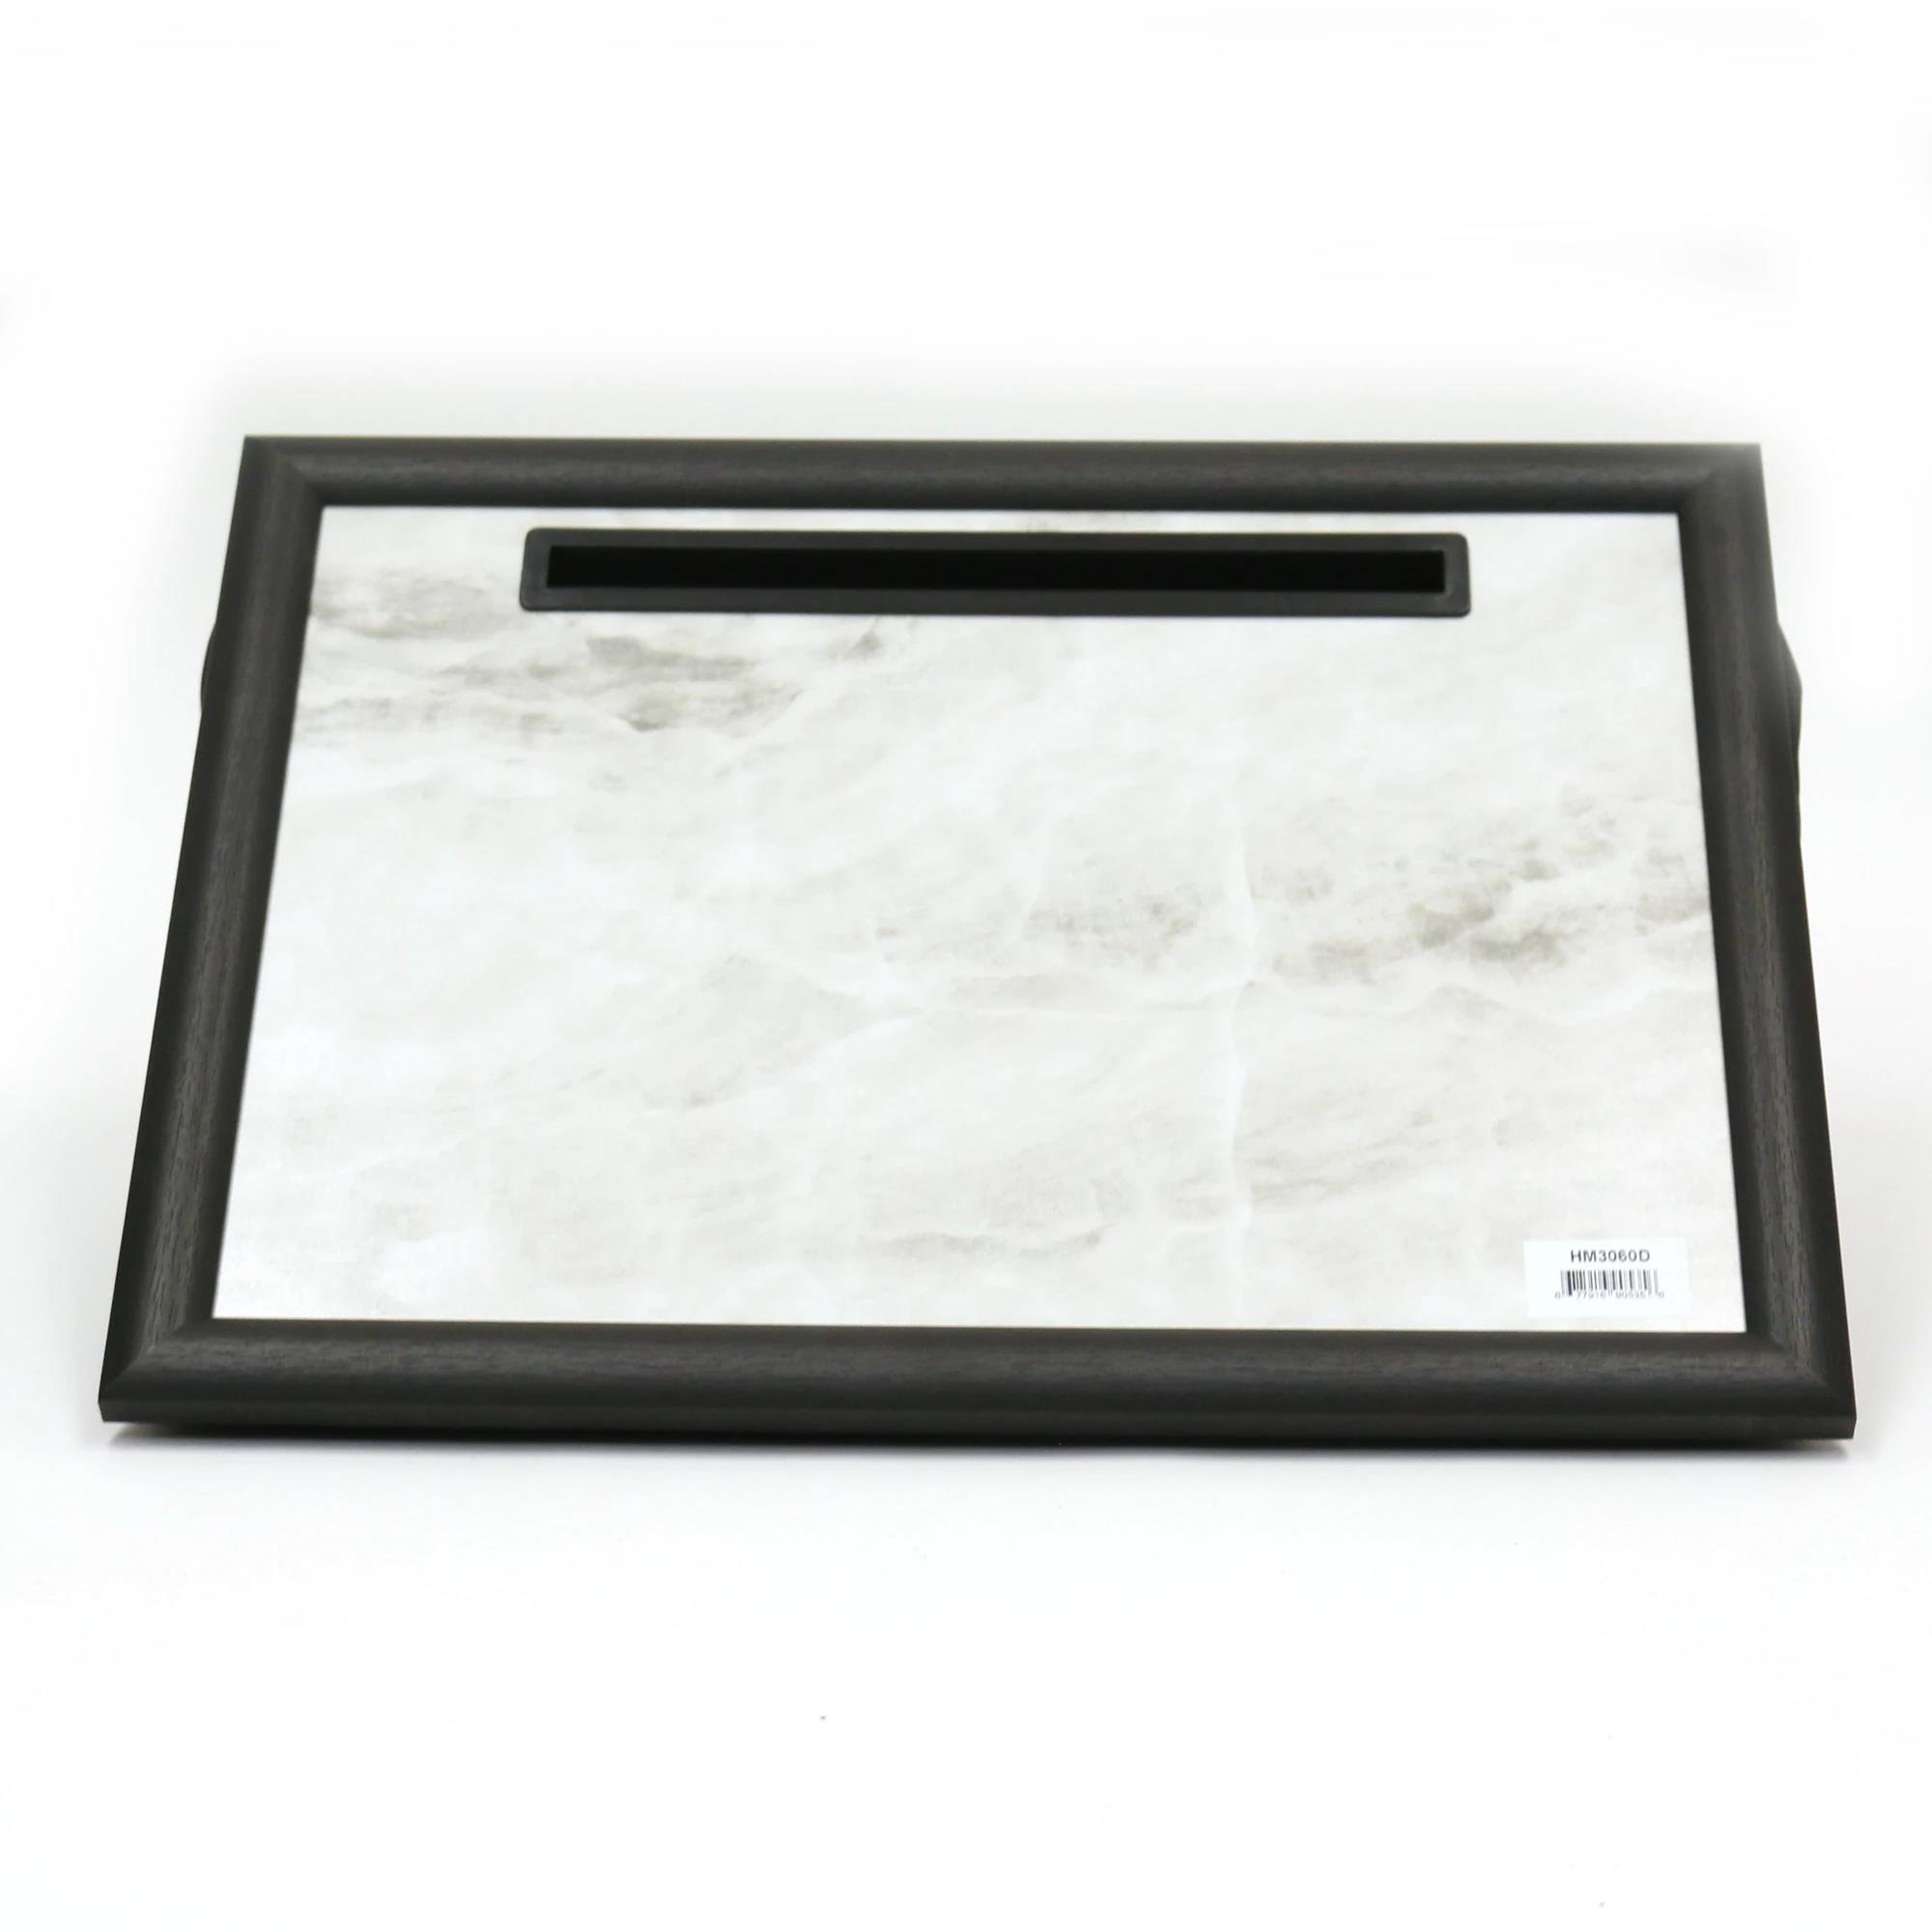 Flomo Marble Lap Desk With Slot in PDQ